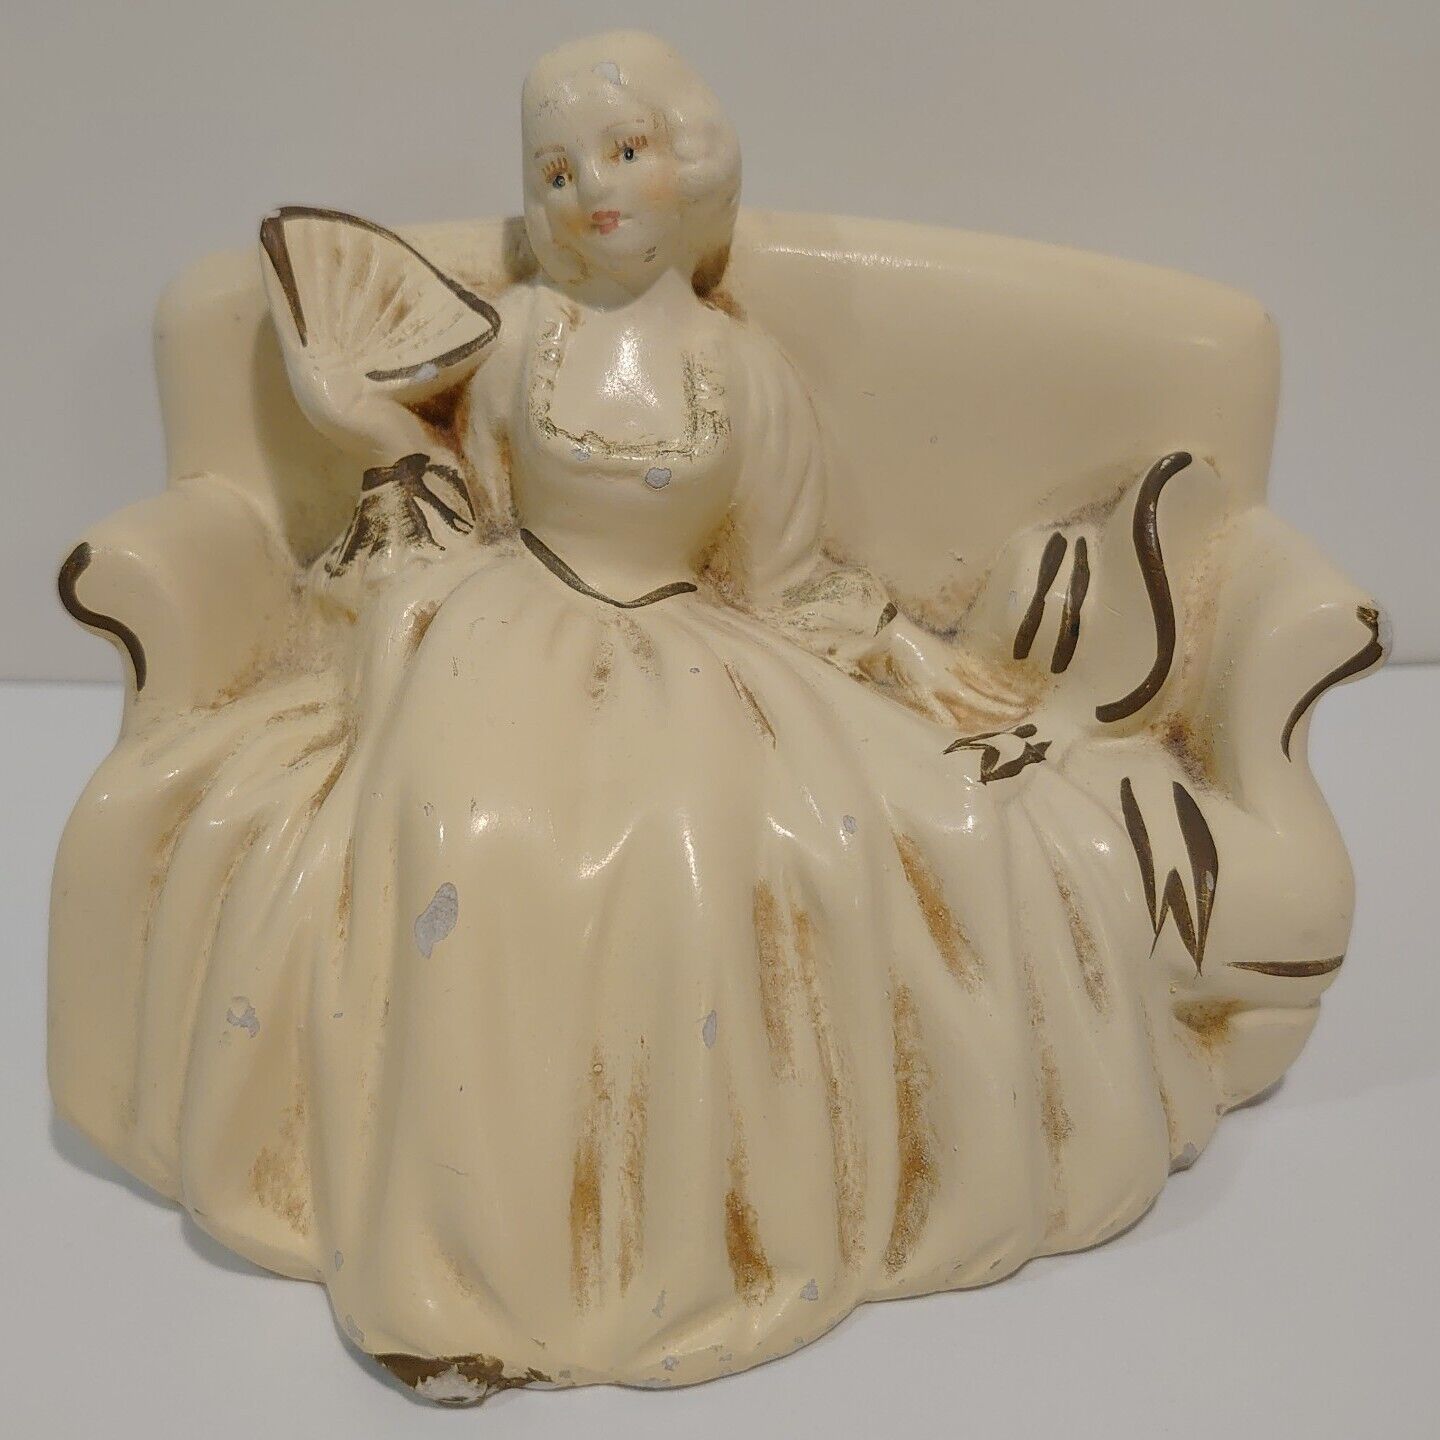 Vintage Chalkware Figurine French Mademoiselle with Fan Seated on Couch